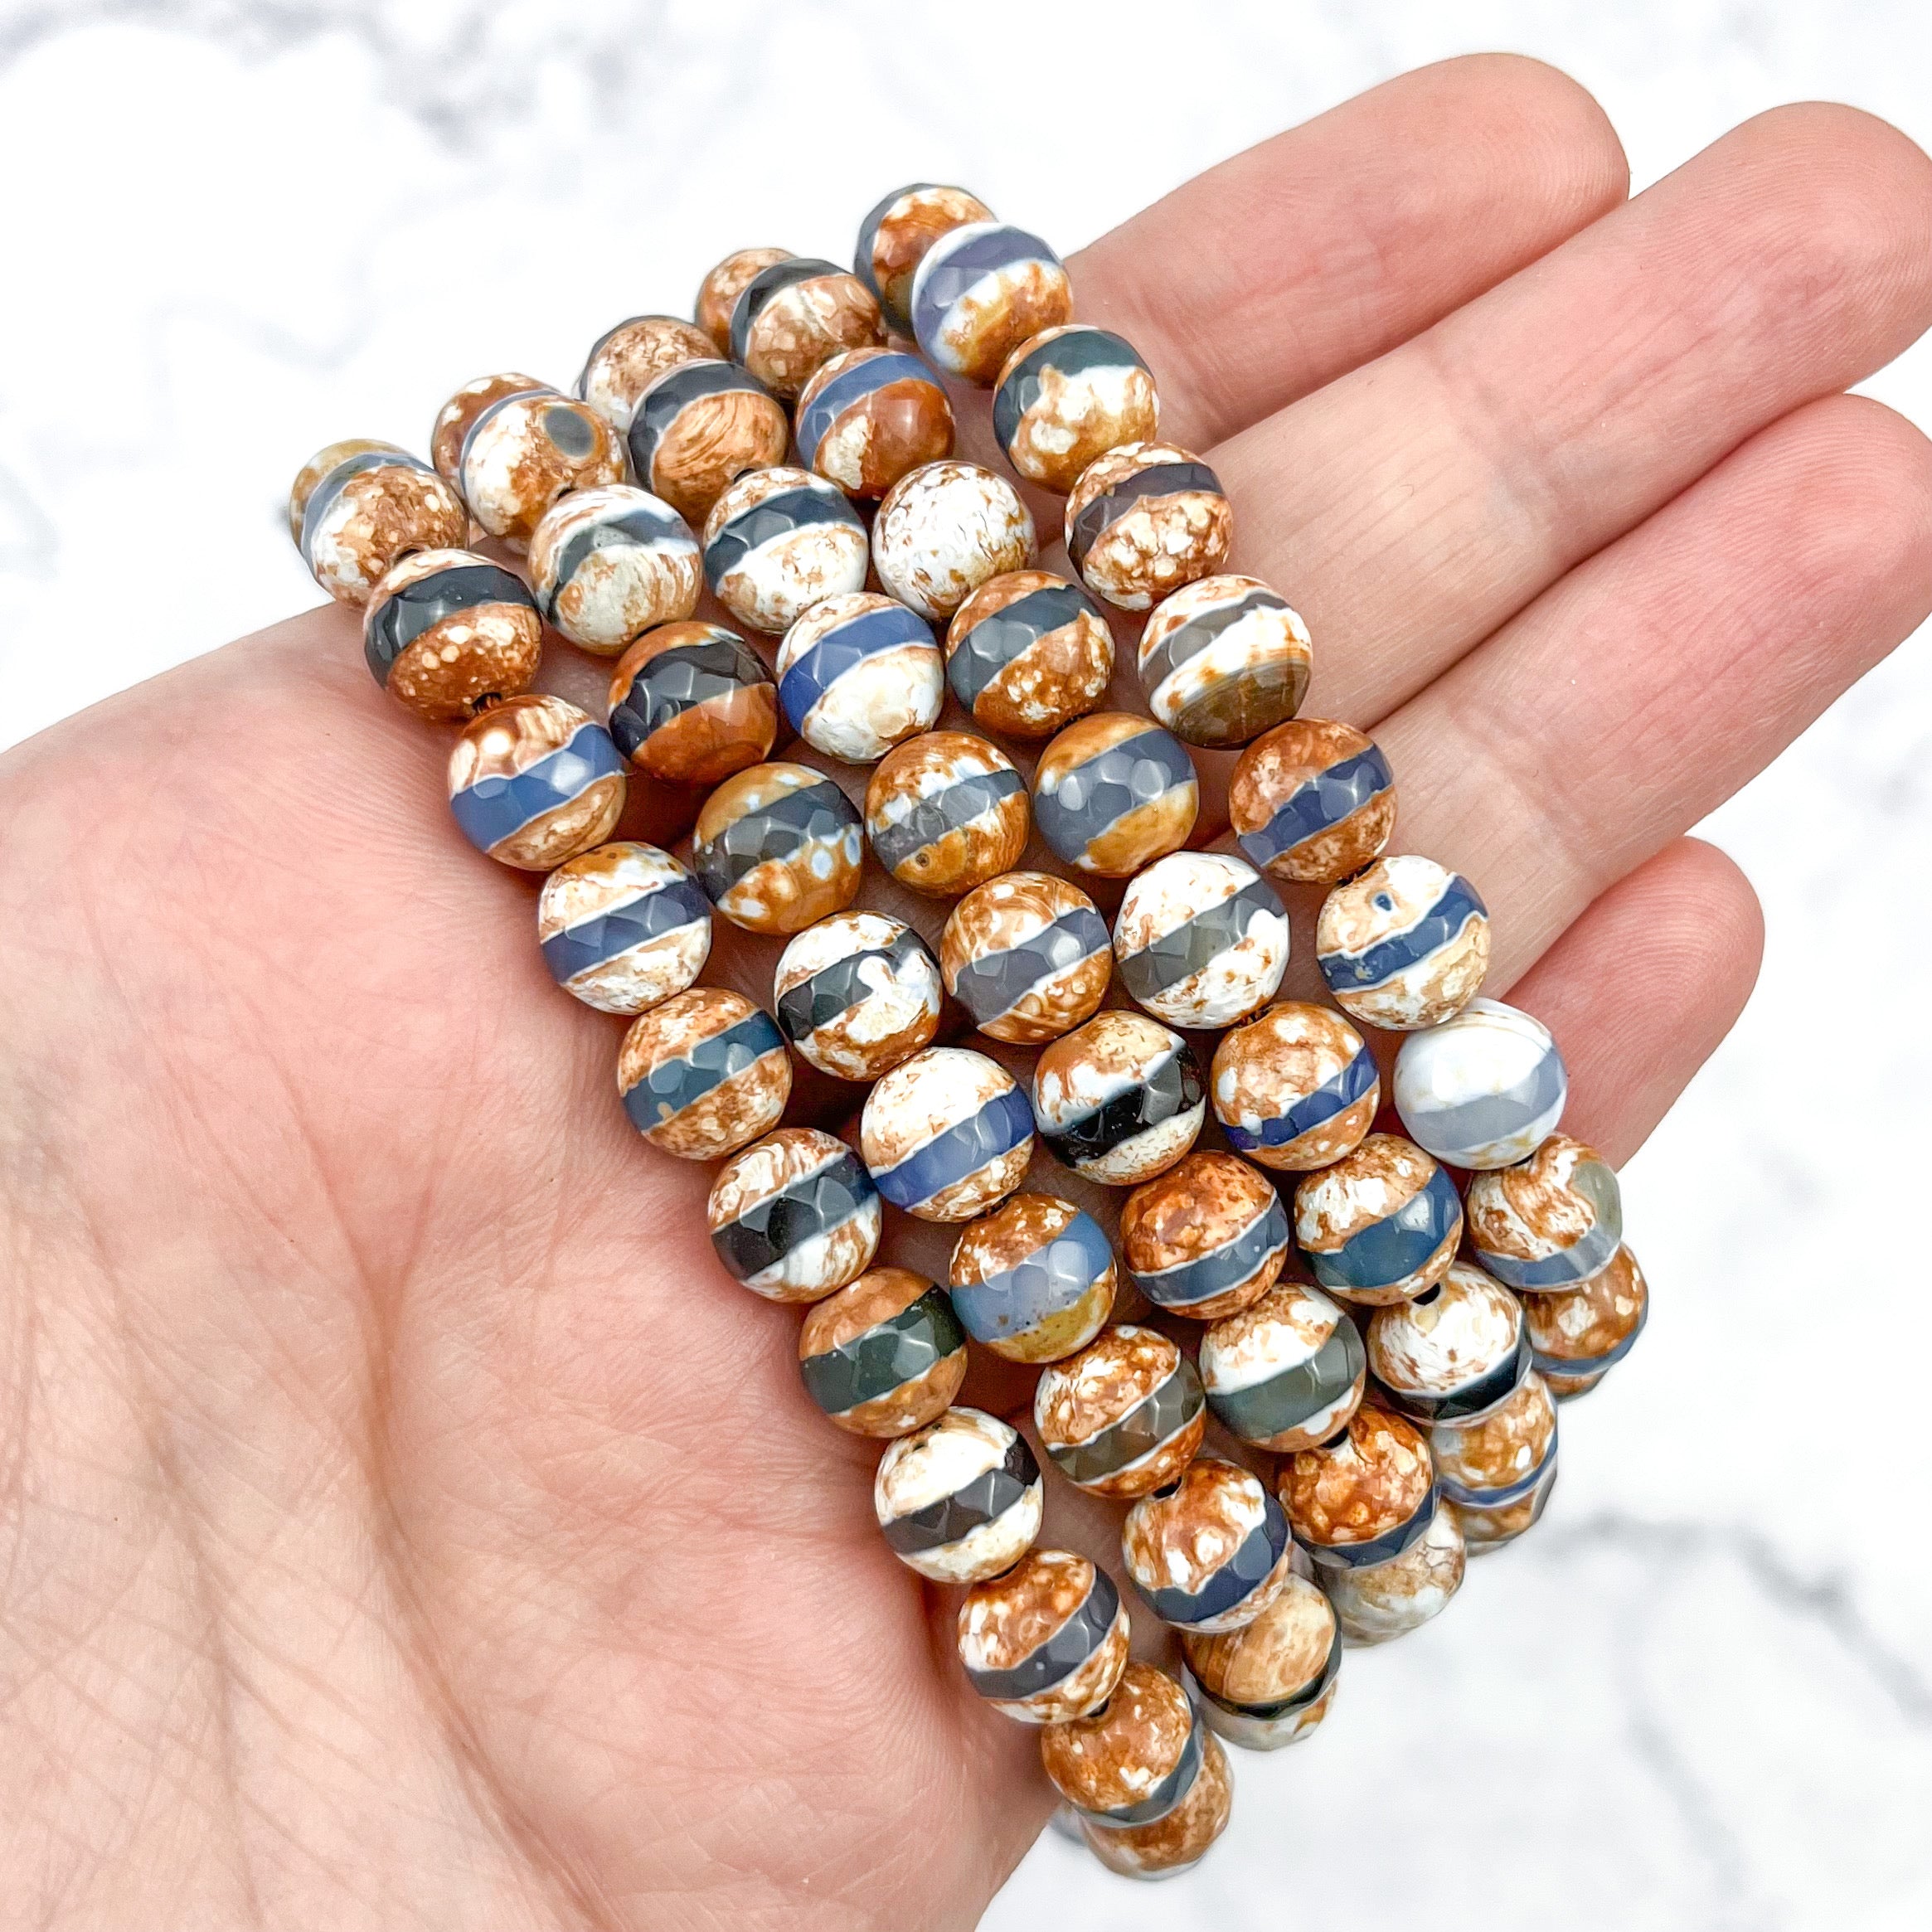 8mm Faceted Antique Blue/Brown Tibetan Agate Bead Strand